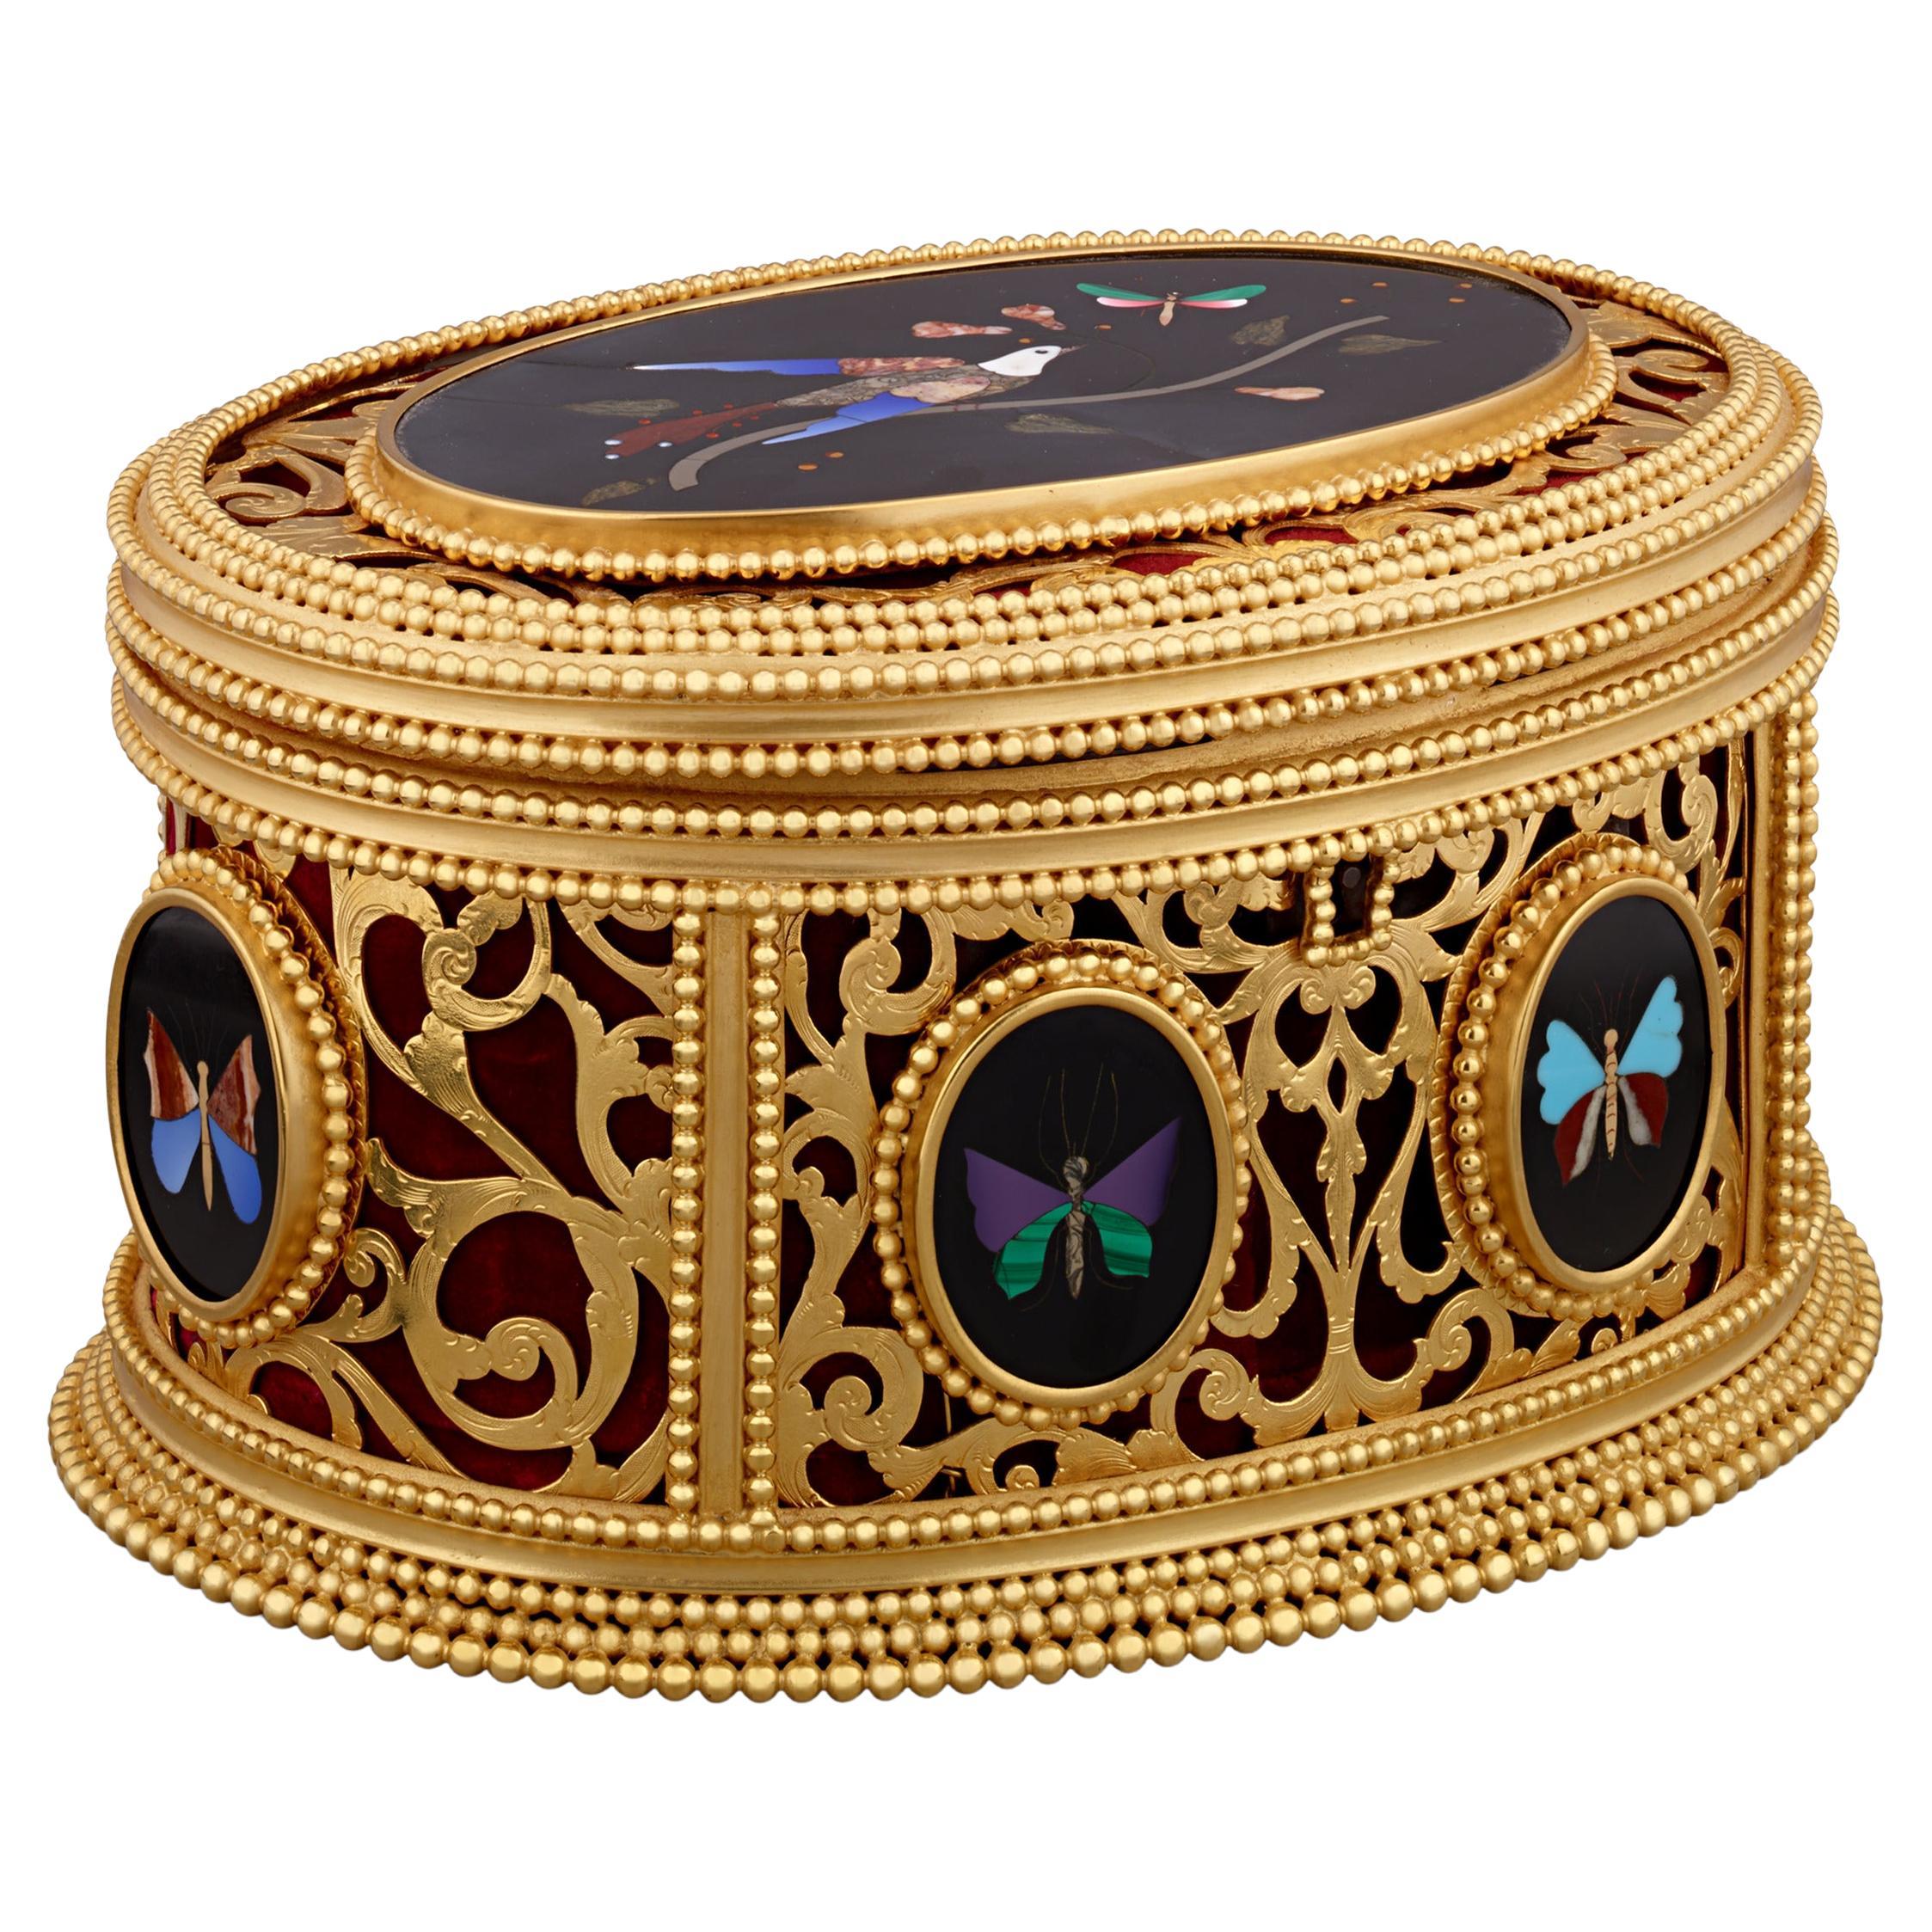 Pietre Dure And Doré Bronze Box By Tahan